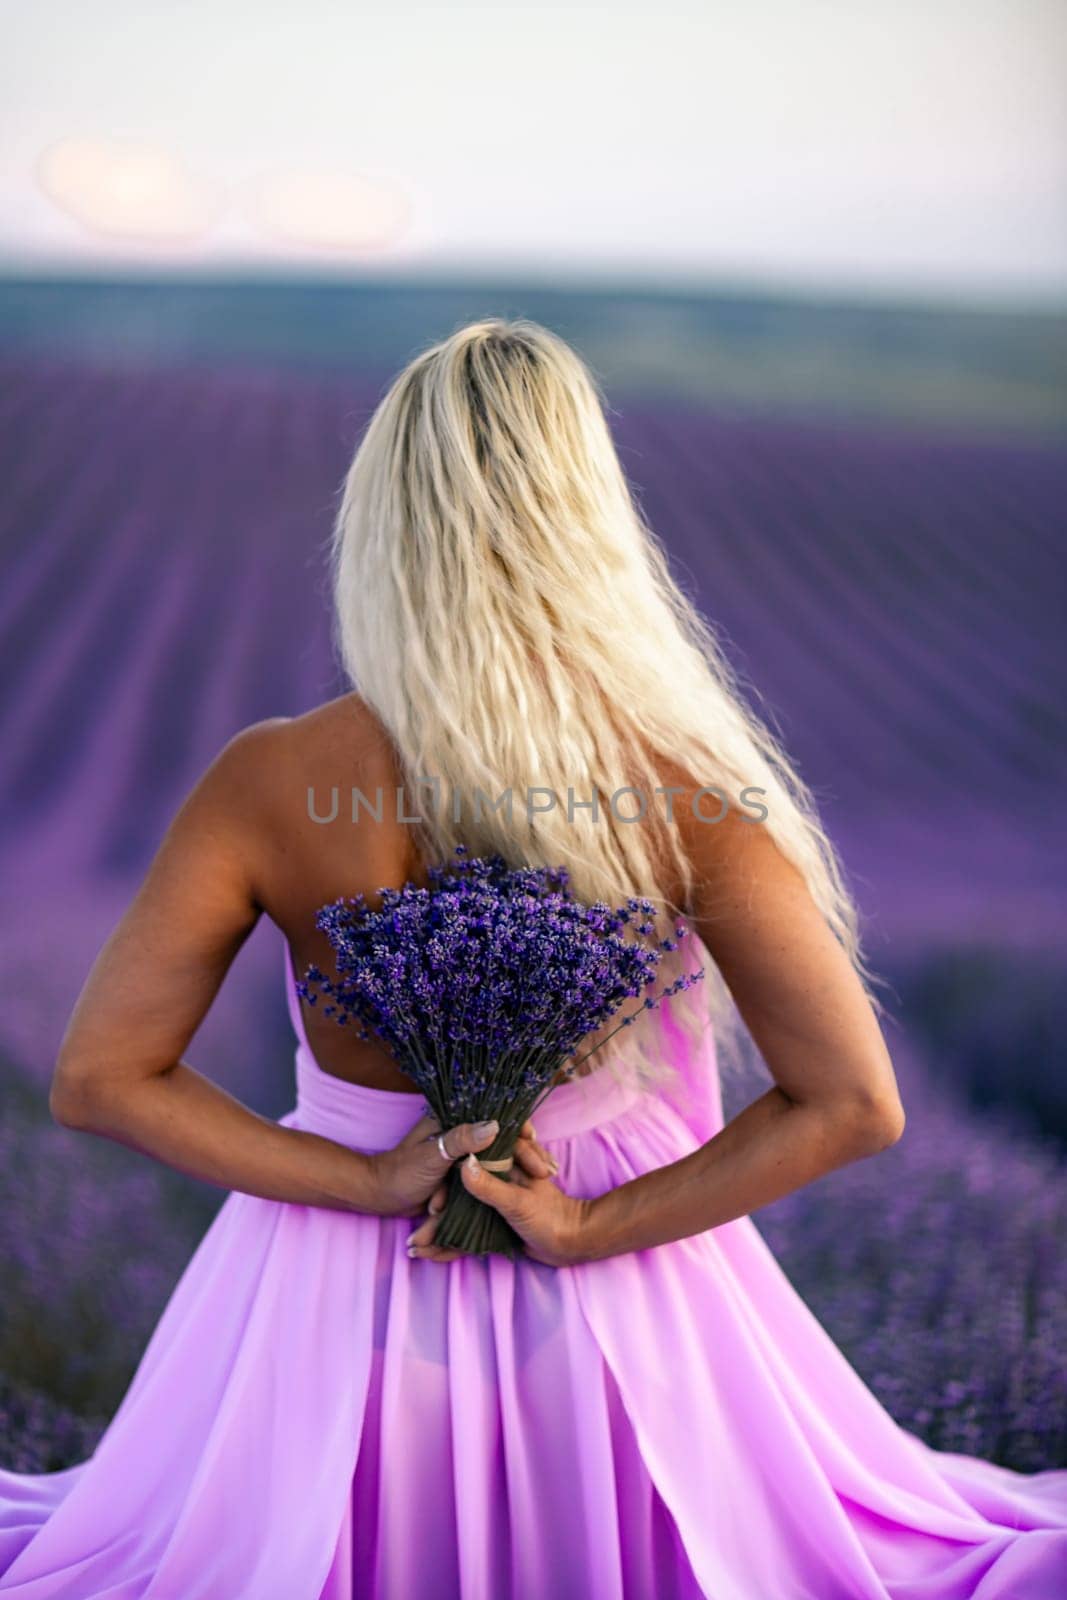 Back view woman lavender sunset. Happy woman in pink dress holds lavender bouquet. Aromatherapy concept, lavender oil, photo session in lavender.